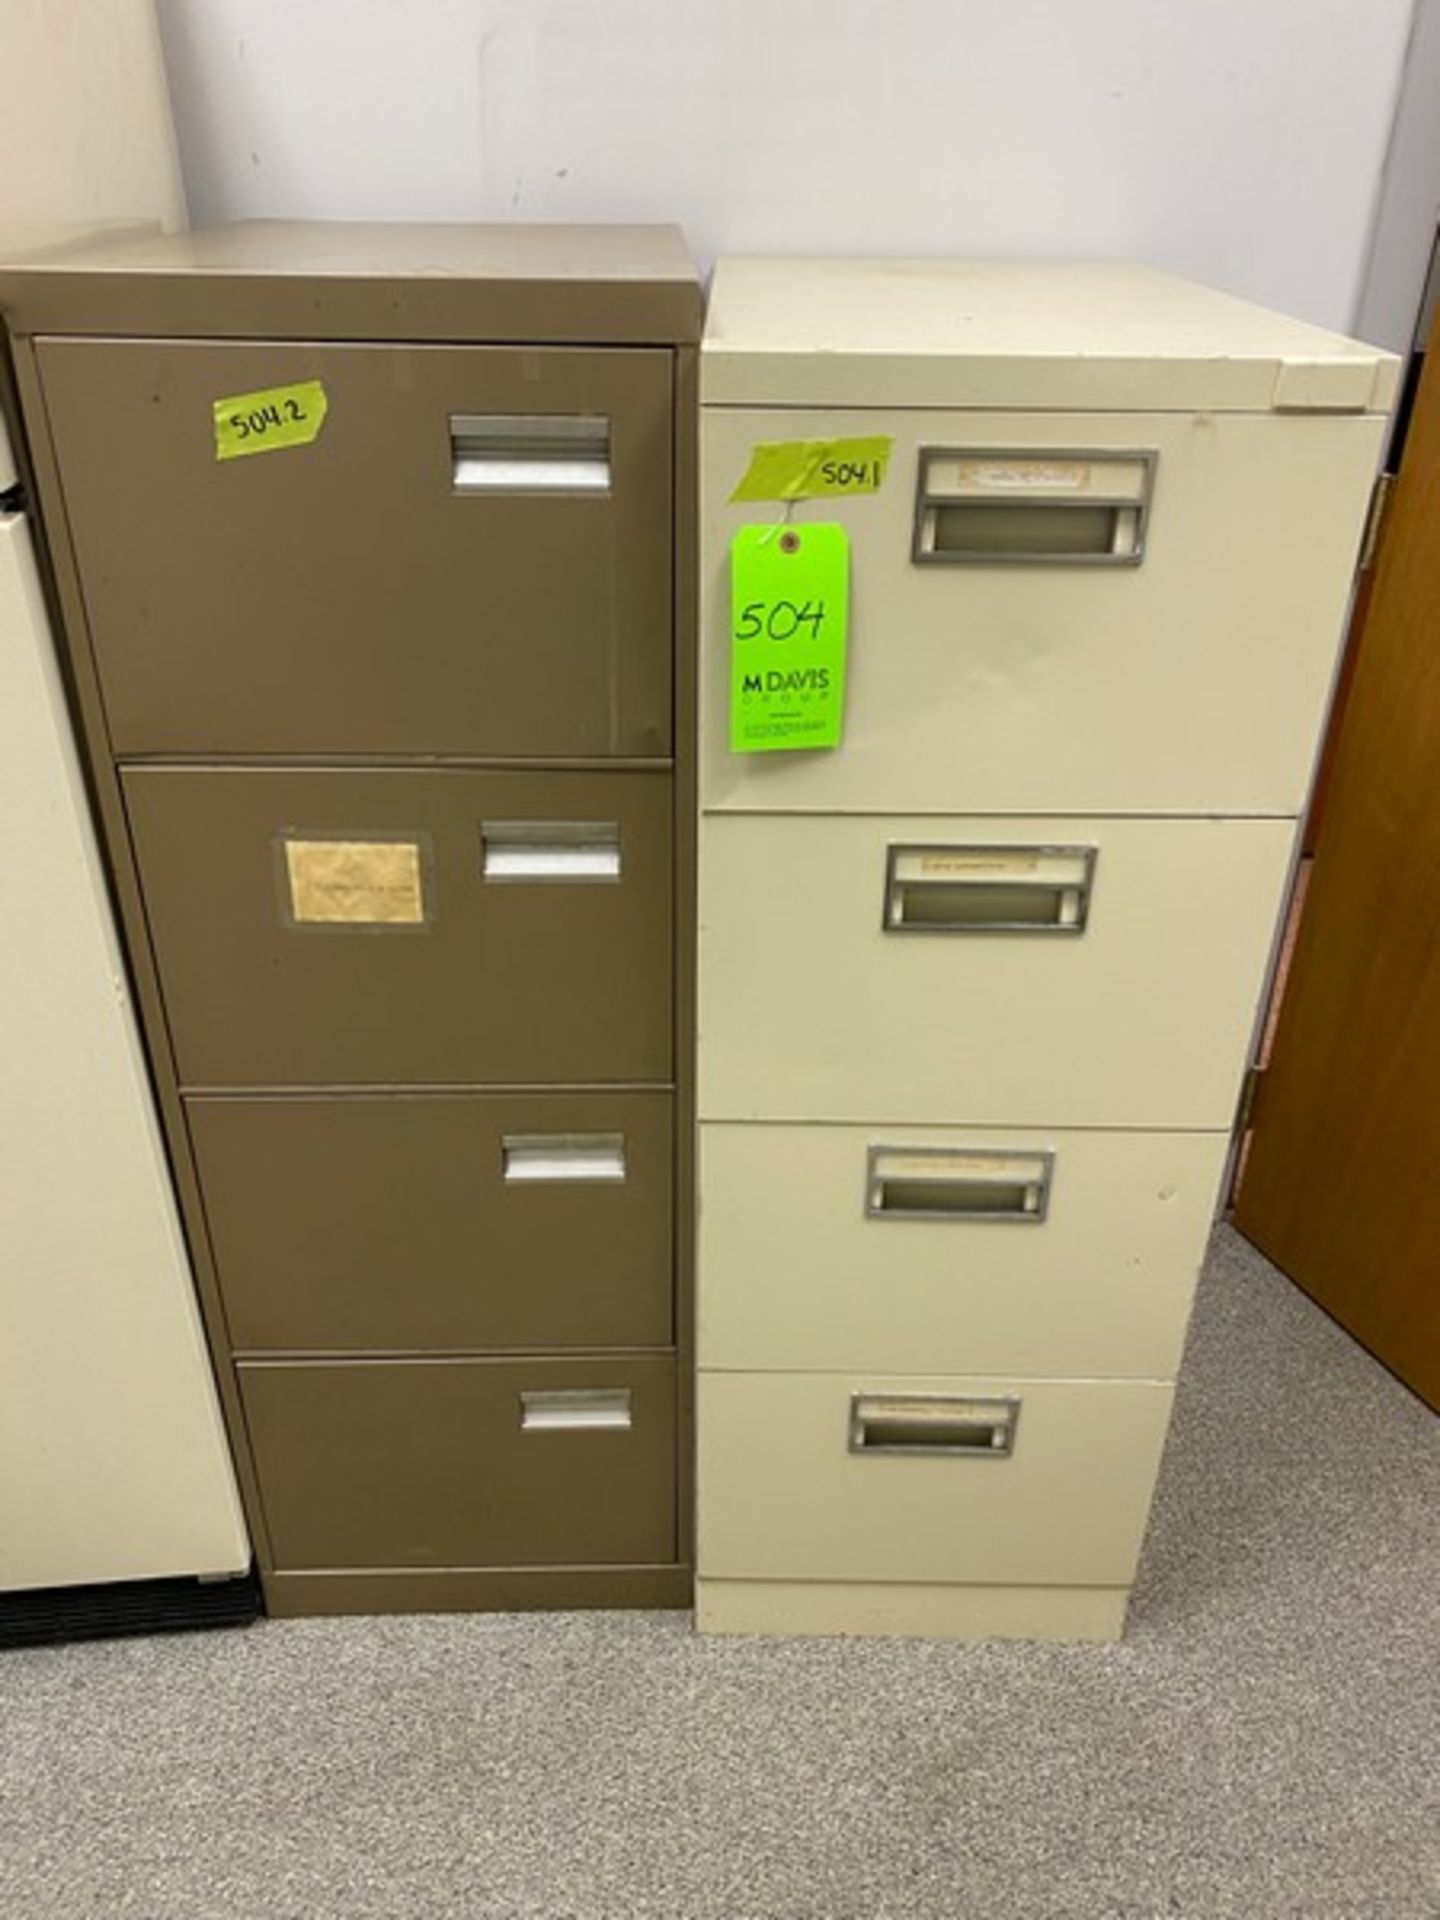 2 filing cabinets without locks. 18"Wx26"Dx52"H & 18"Wx28.5"Dx50.5"H (Elevator Handling Fee $20) (